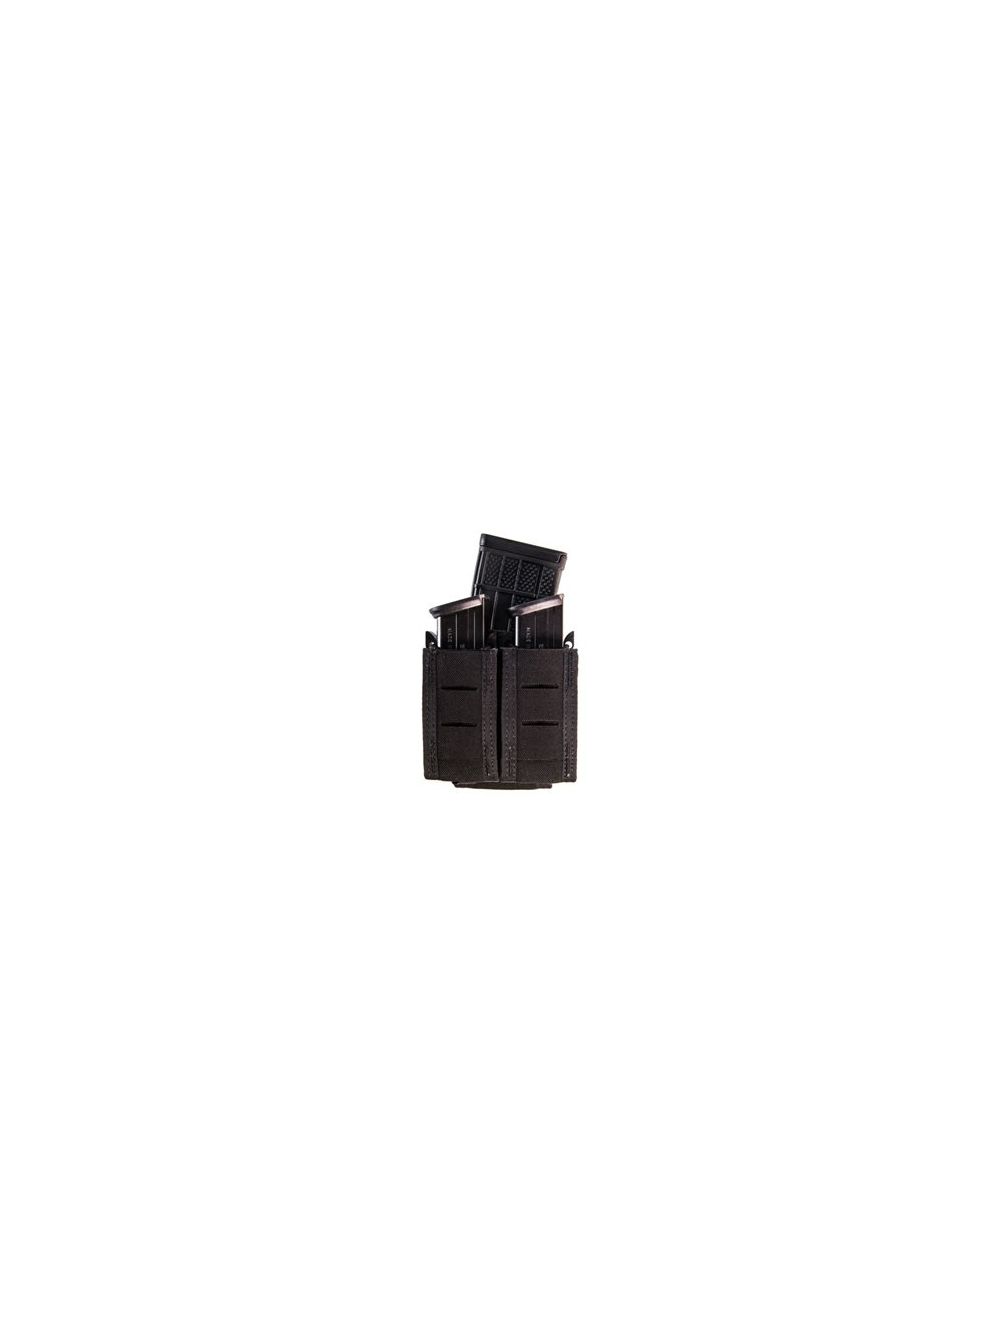 Duty Staggered Double Pistol TACO Covered w/ Rifle U-MOUNT